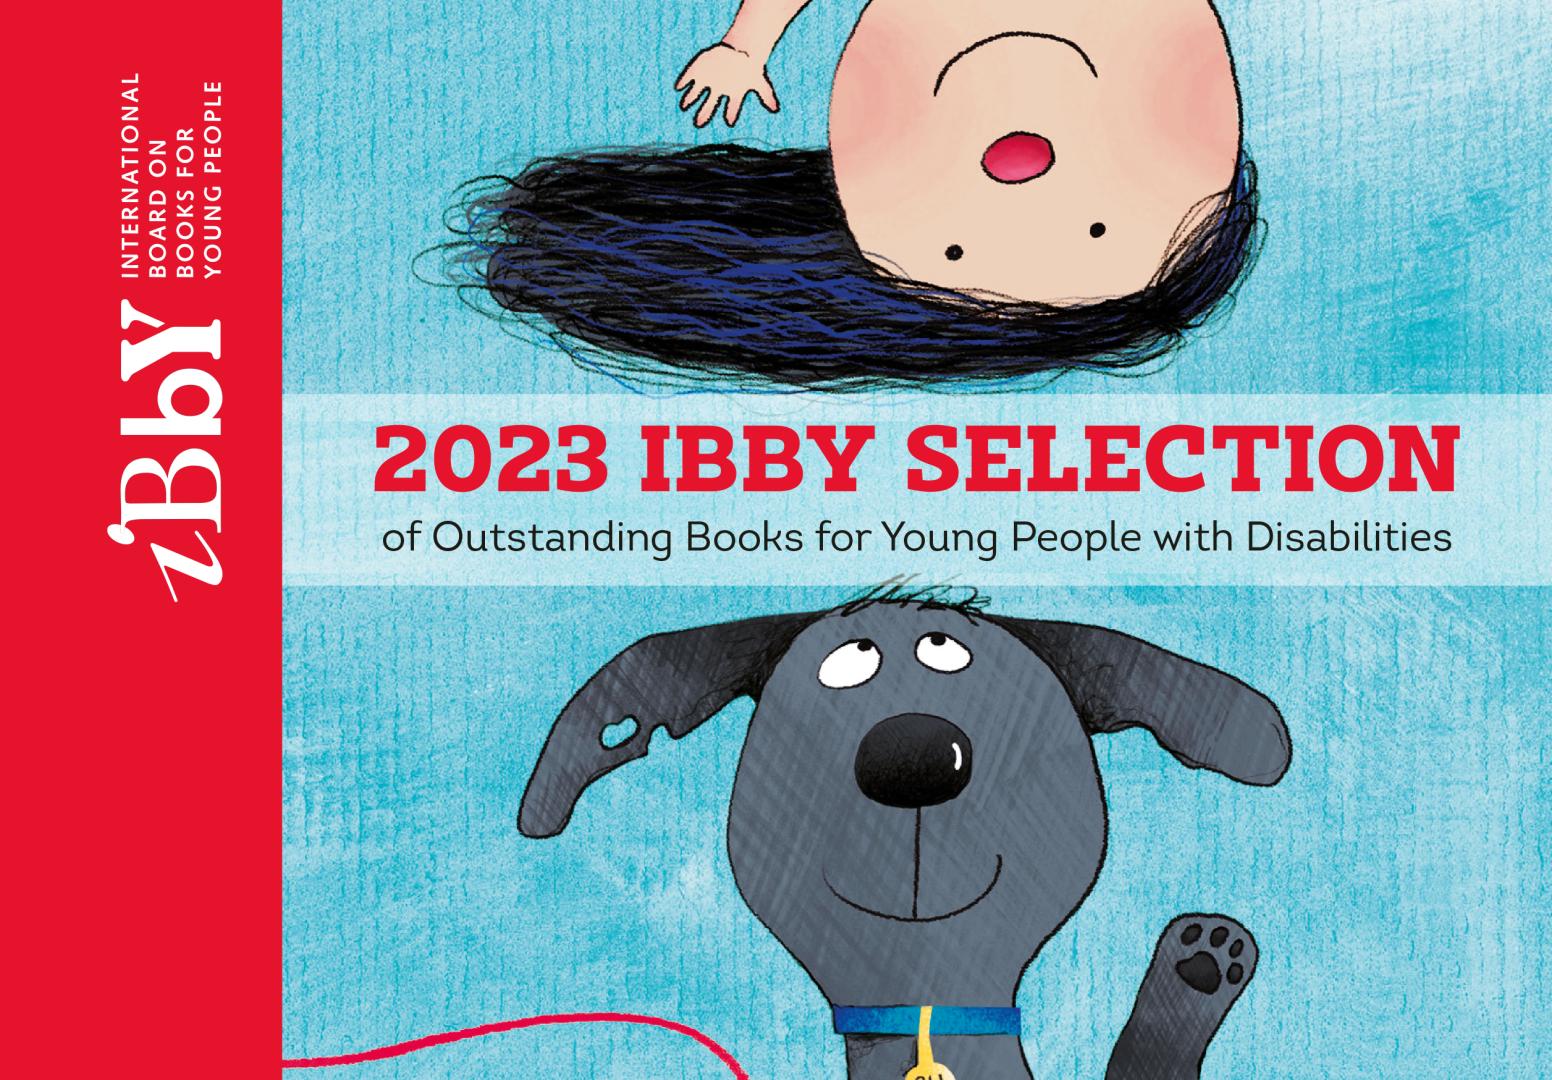 Book cover: Shows the front cover and spine of the 2023 IBBY Catalogue. The spine reads: IBBY I ...